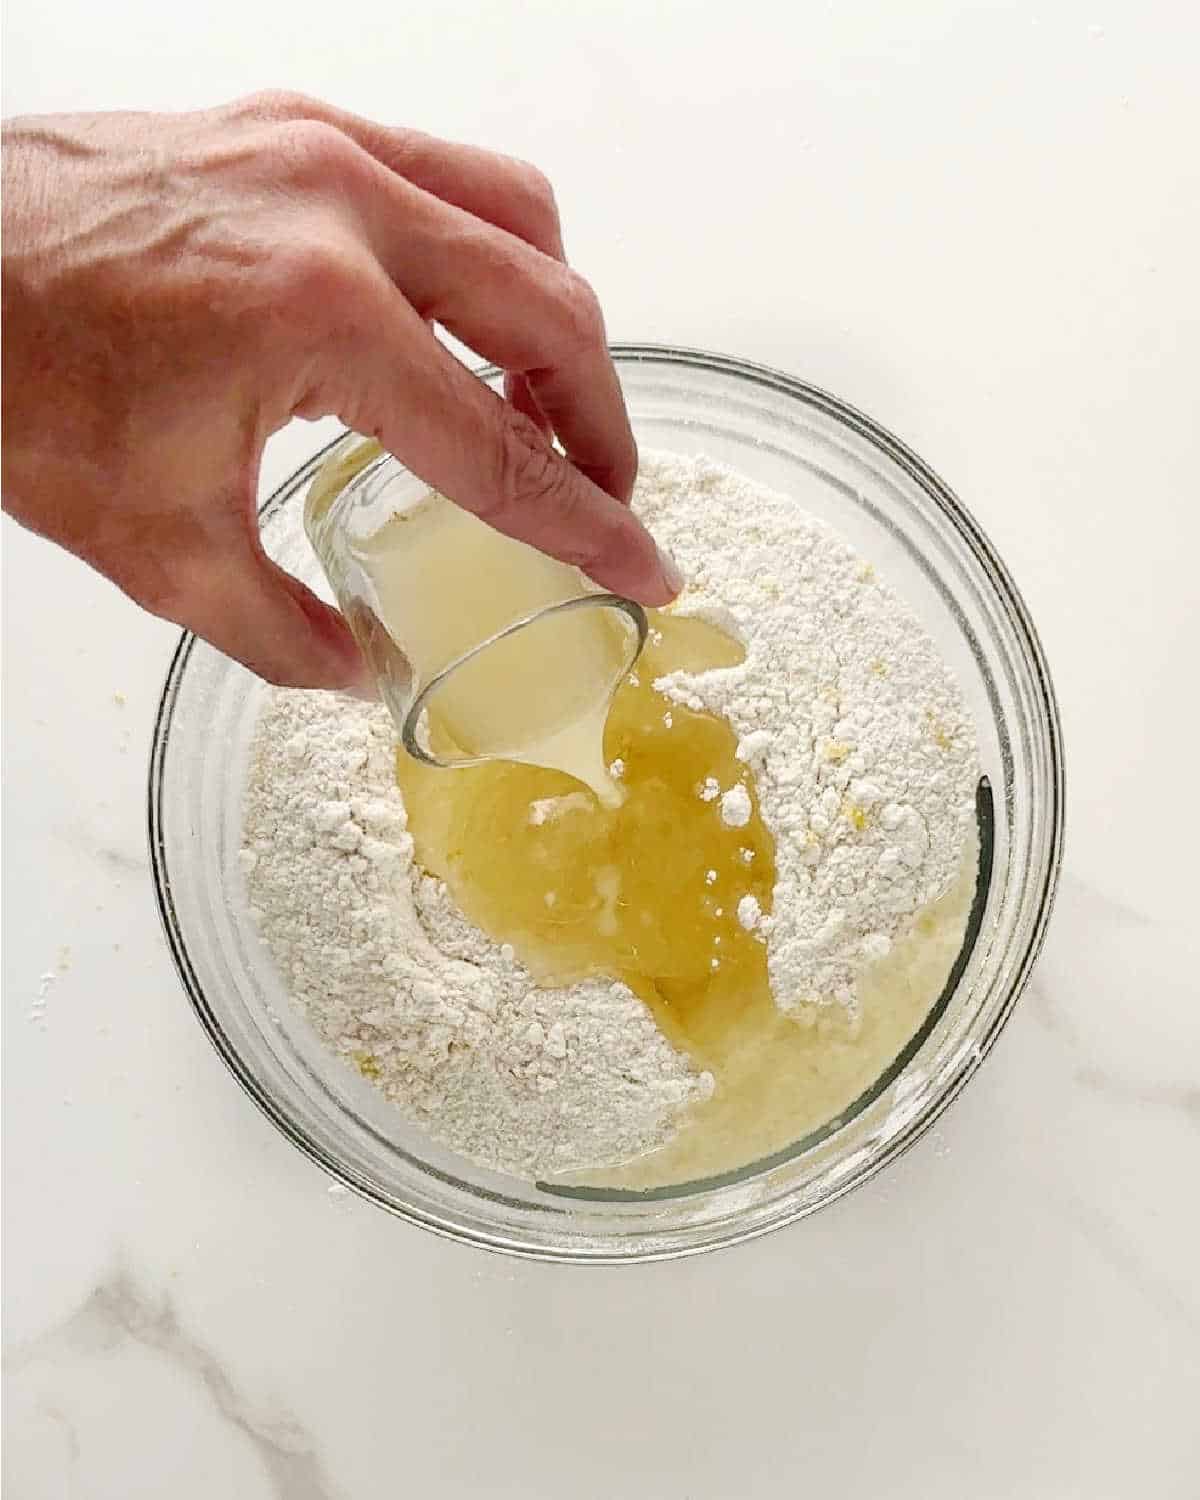 Adding lemon juice to glass bowl with flour mixture and oil. White marble surface.